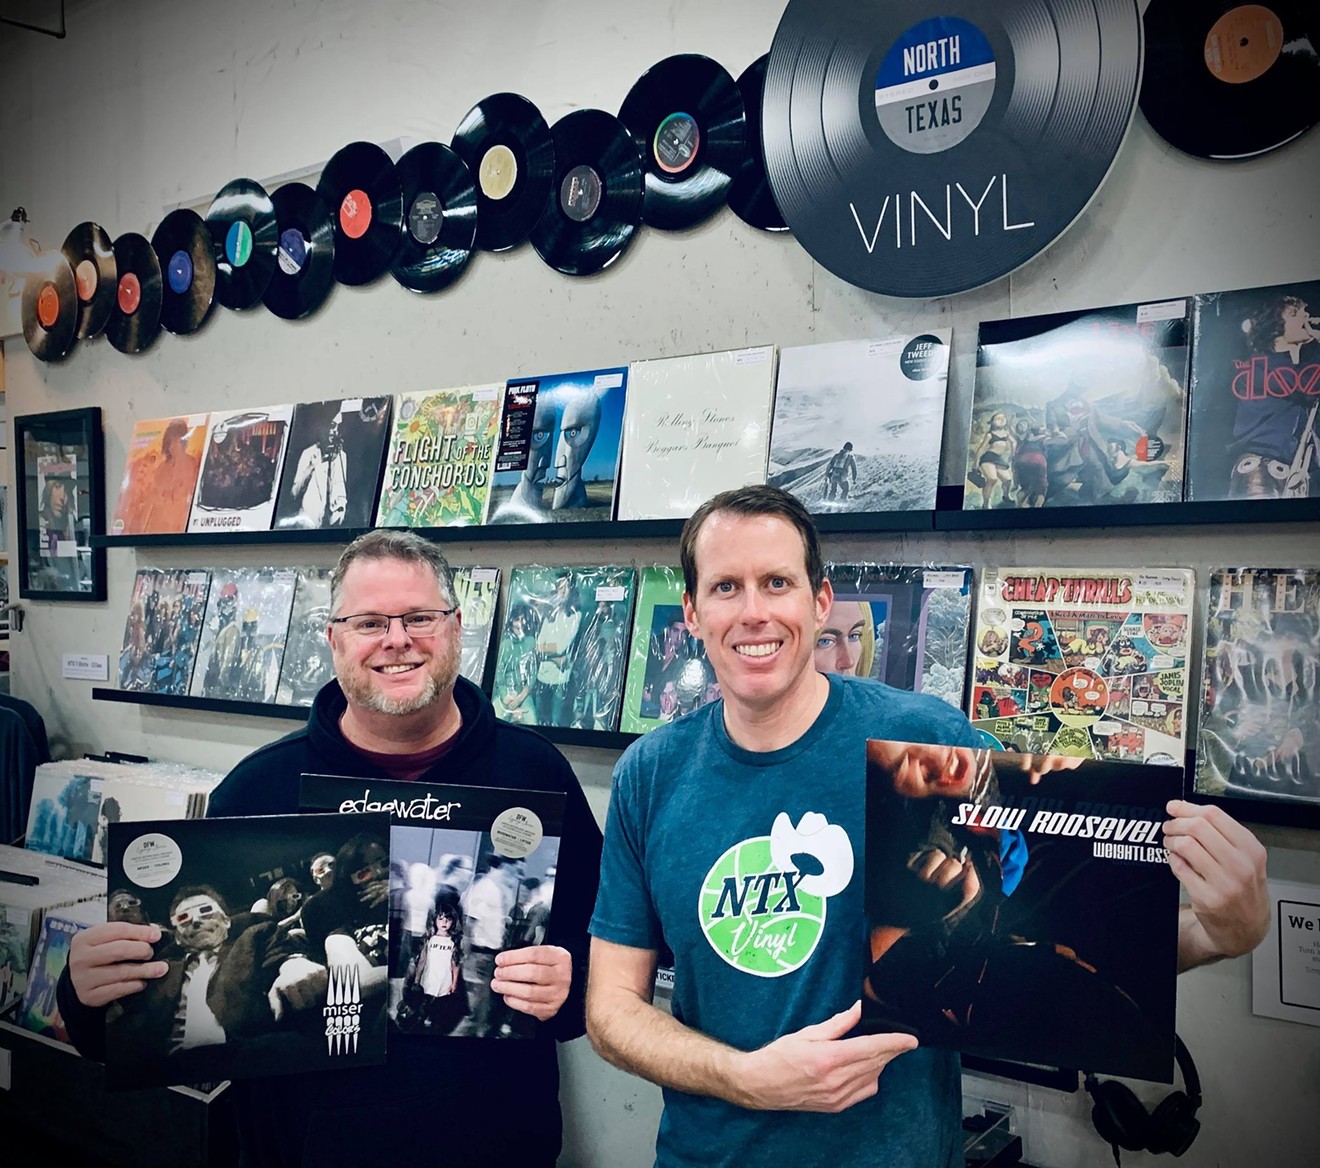 Travis Hill (left) and GI Sanders, at NTX Vinyl, are helping local nonprofits through rereleases of local albums from the early 2000s.